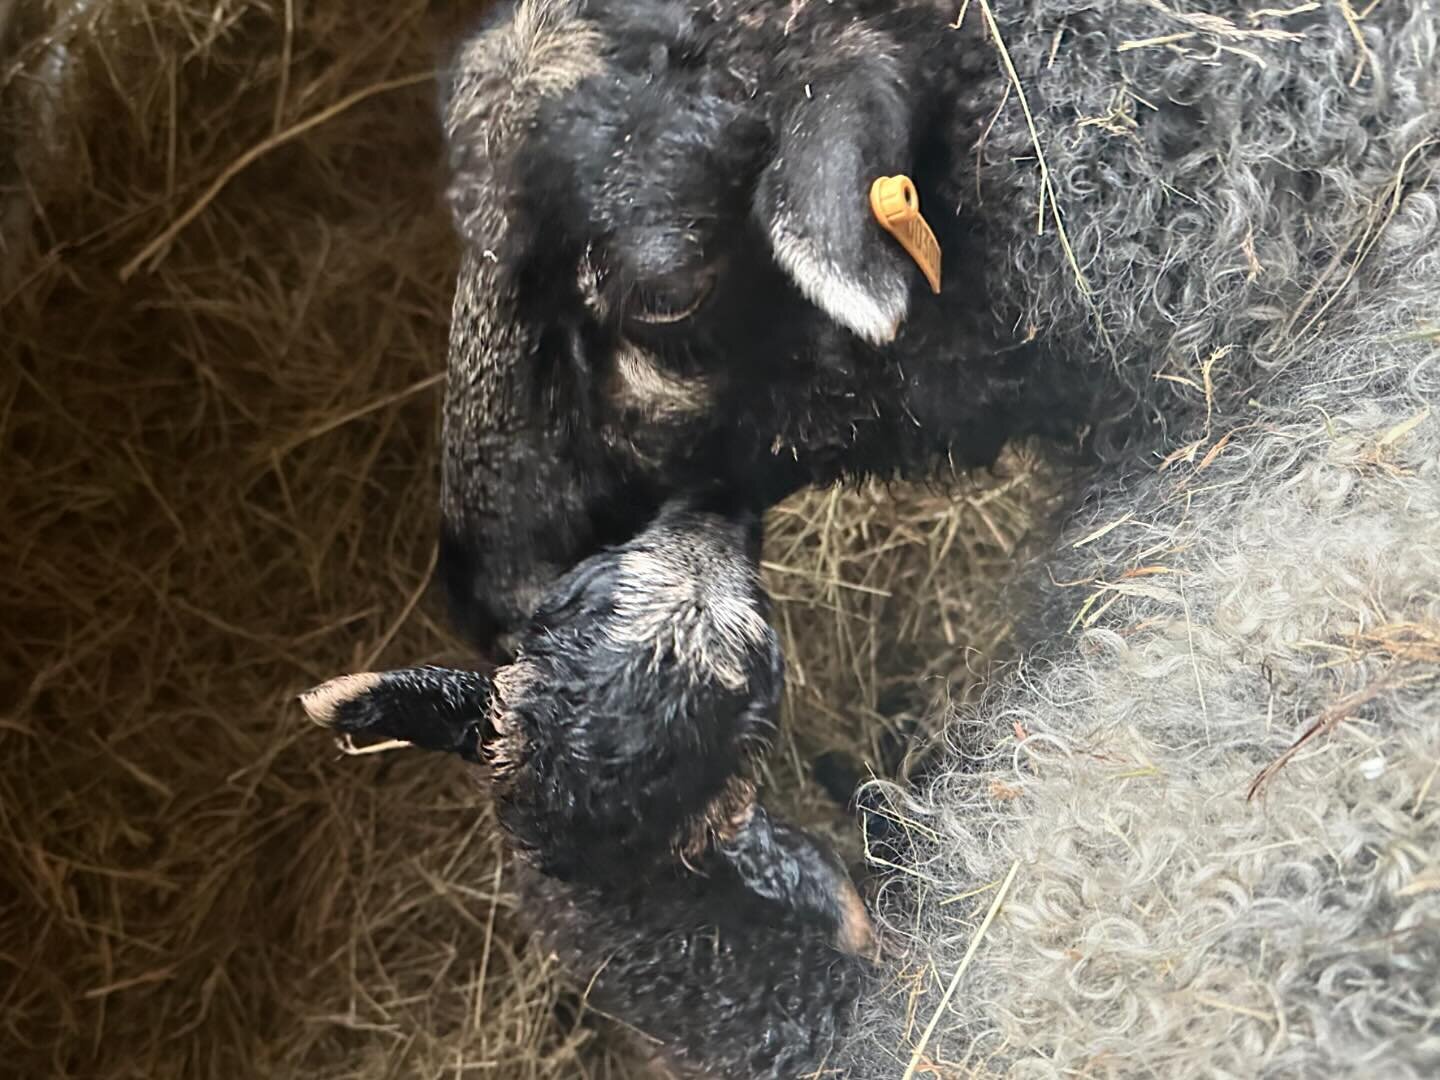 This is Crumb - always a brilliant mum. It has been incredibly wet this spring which has made lambing quite hard. Thank goodness for the new barn which is in full use. Some of our much loved older ewes (Crumb included) will be going into retirement a